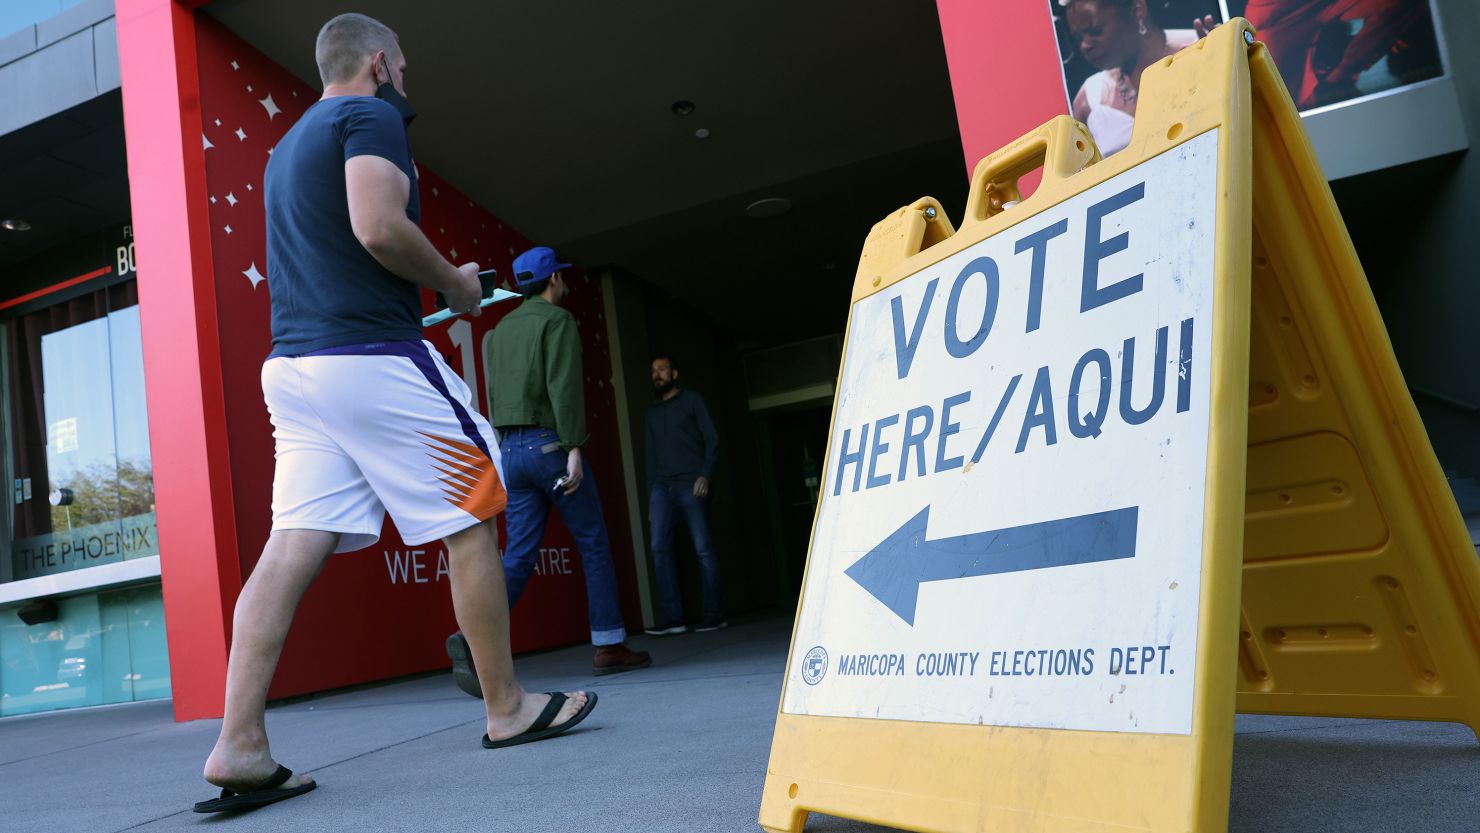 Voters arrive to cast their ballots at the Phoenix Art Museum on November 8, 2022.